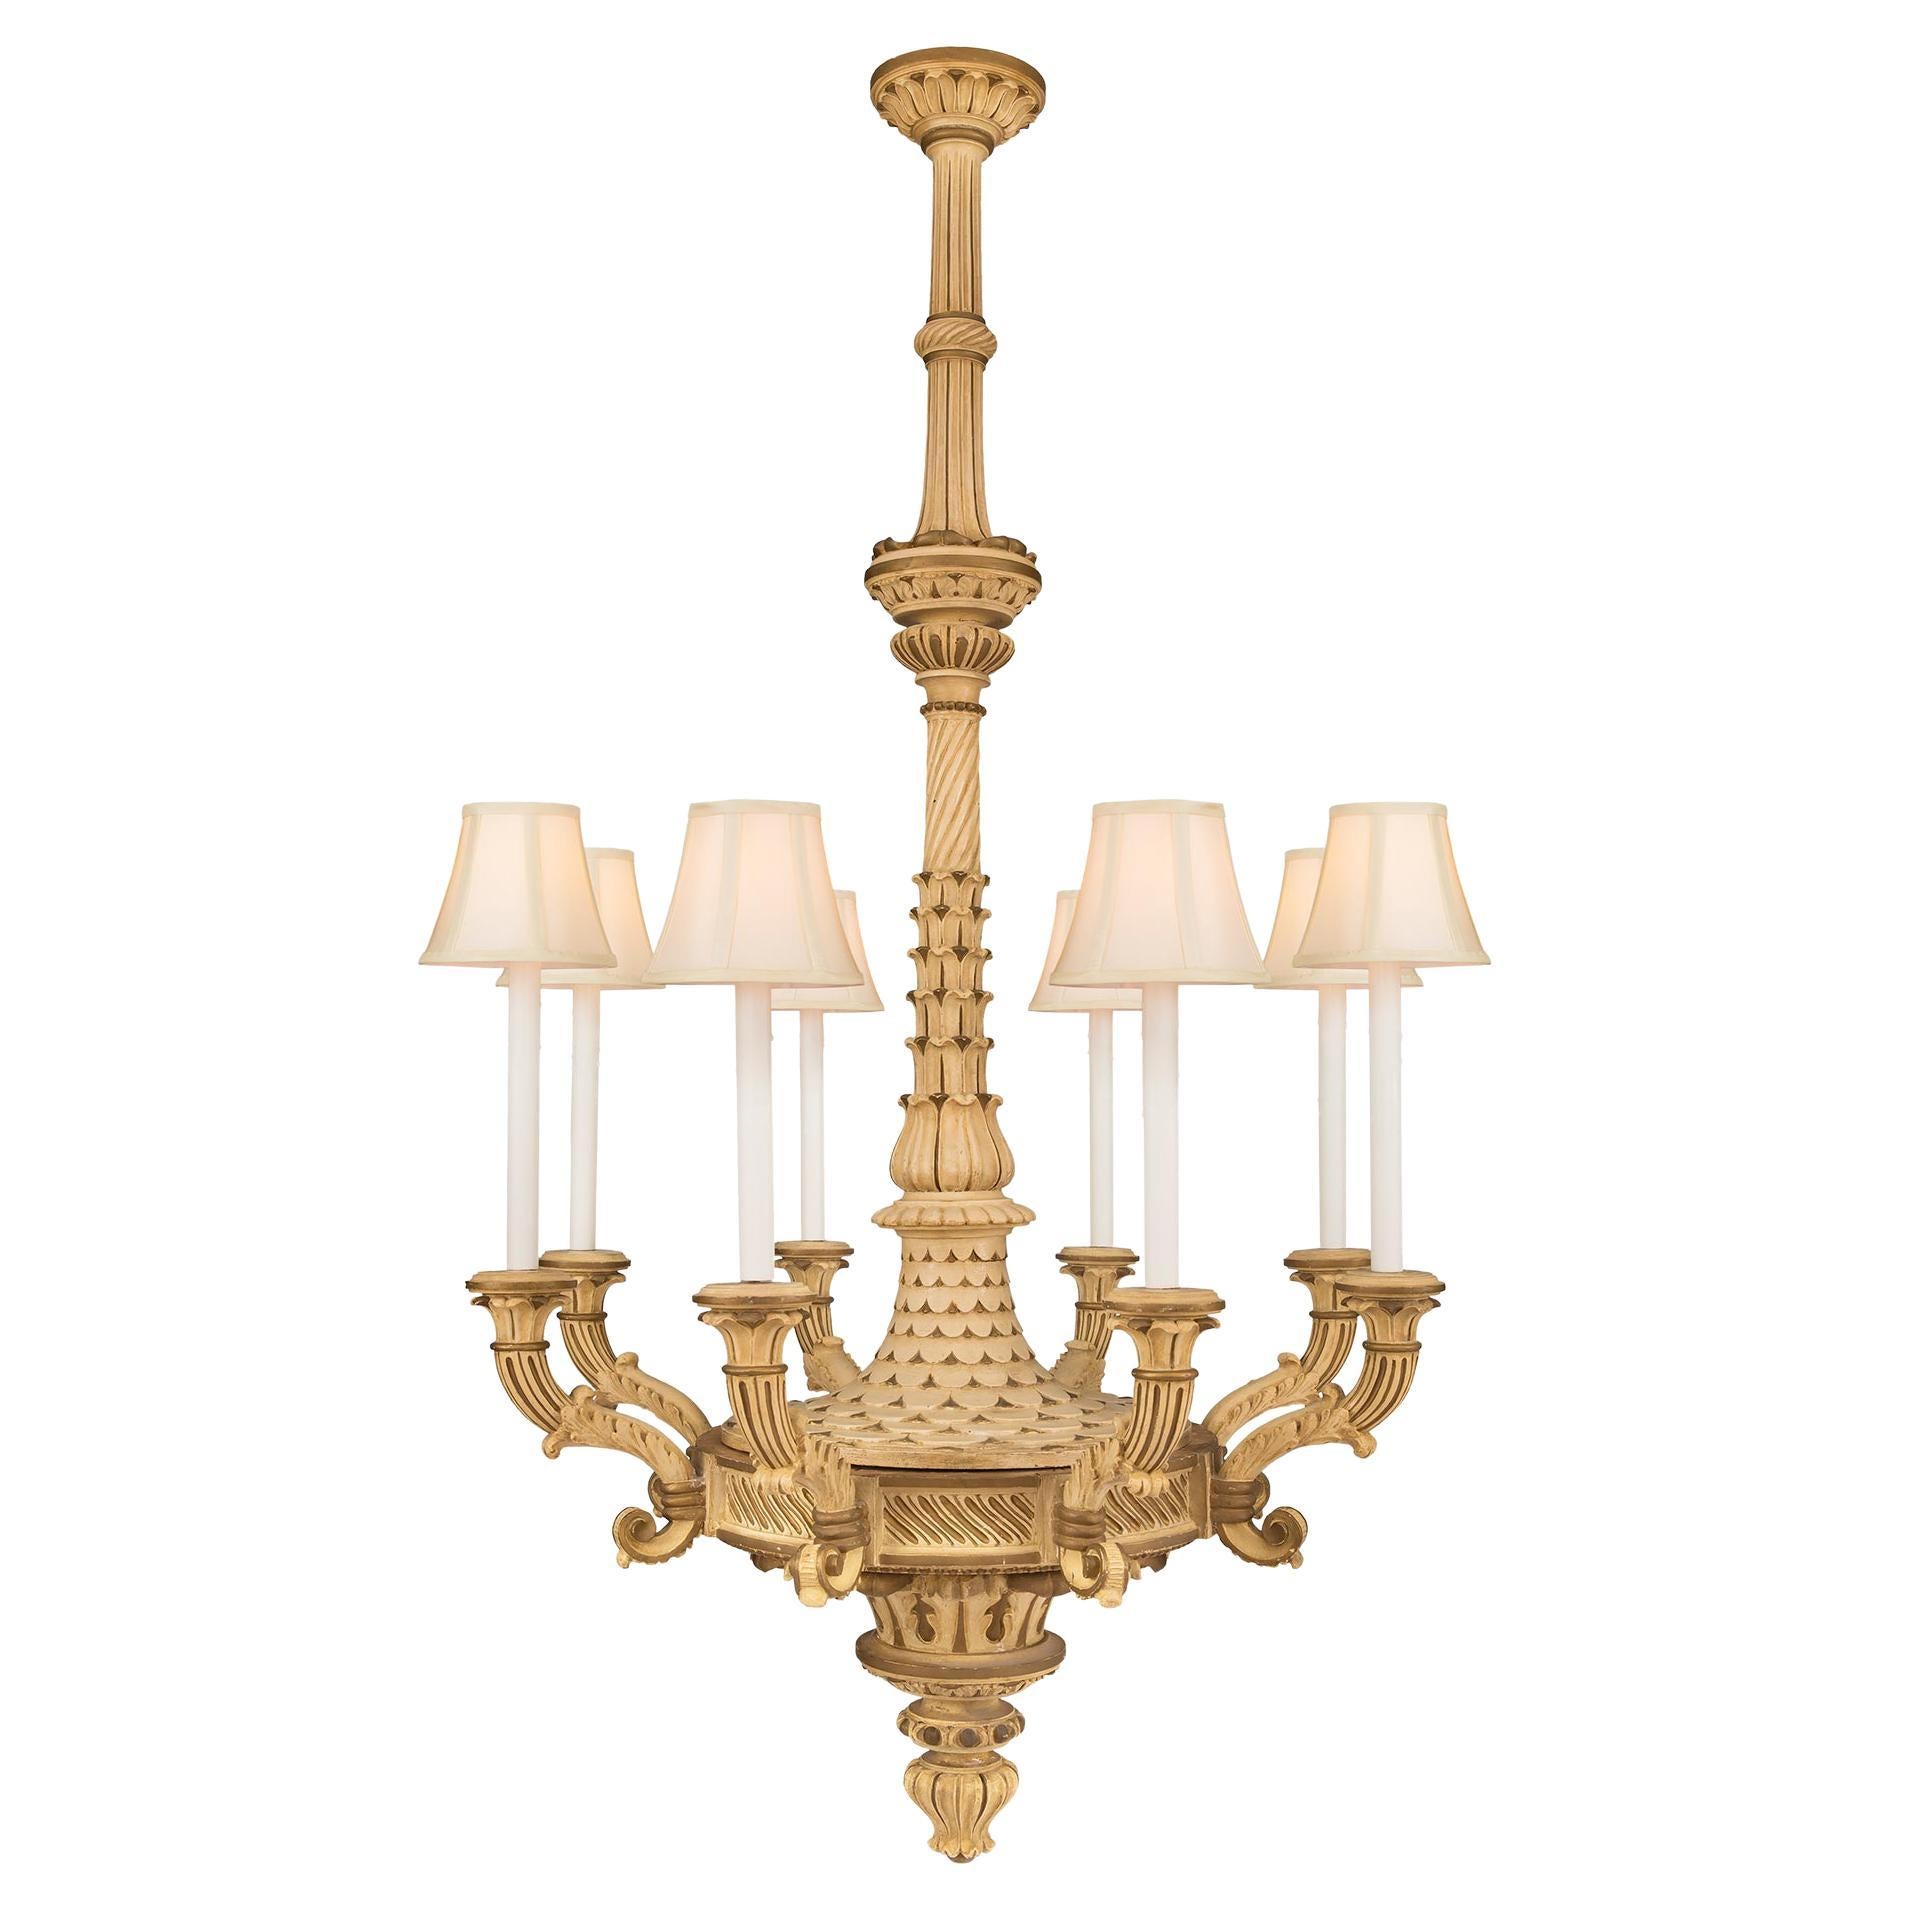 Italian 19th Century Neoclassical Patinated Eight-Arm Chandelier